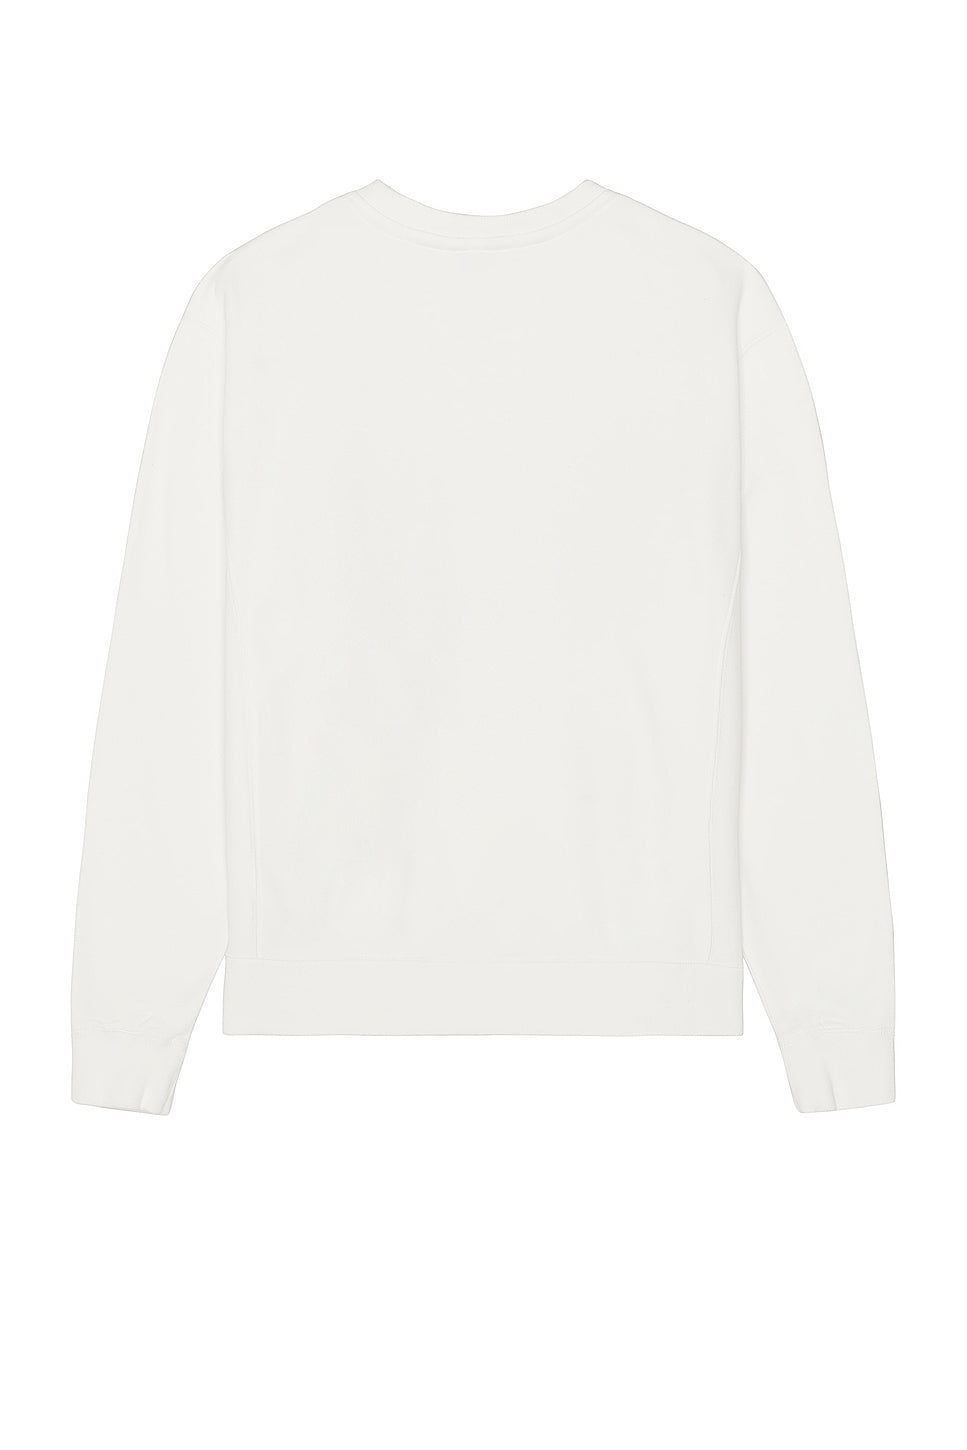 By Verdy Classic Sweater